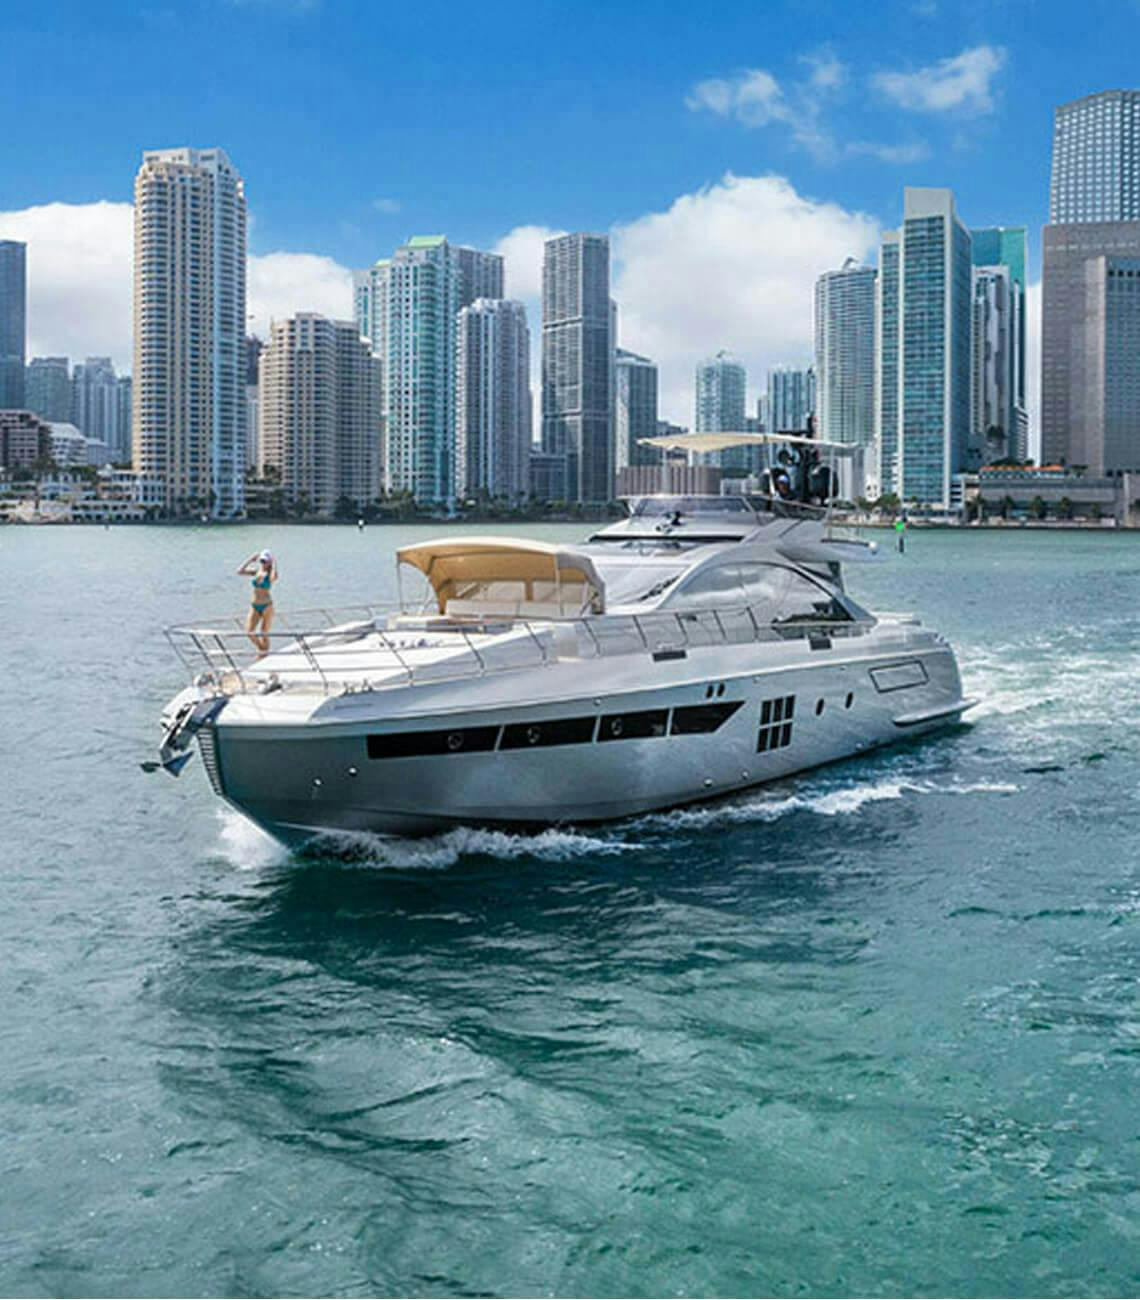 Brickell City Centre Penthouse Buyers Get One-Year YachtLife Membership